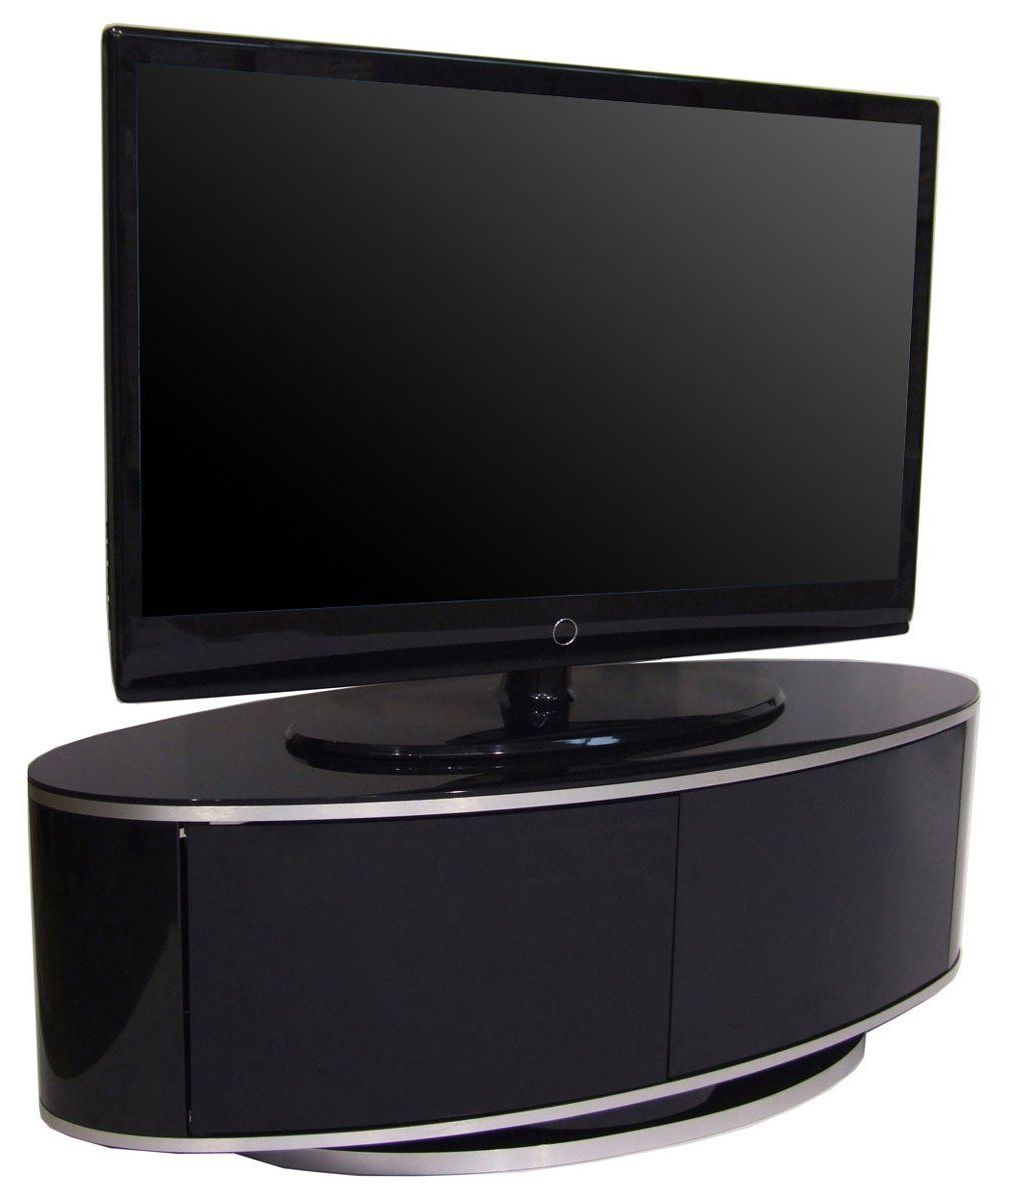 Mda Designs High Gloss Black Oval Tv Stand With Swivel Base And Throughout Most Recently Released White Oval Tv Stands (View 6 of 20)